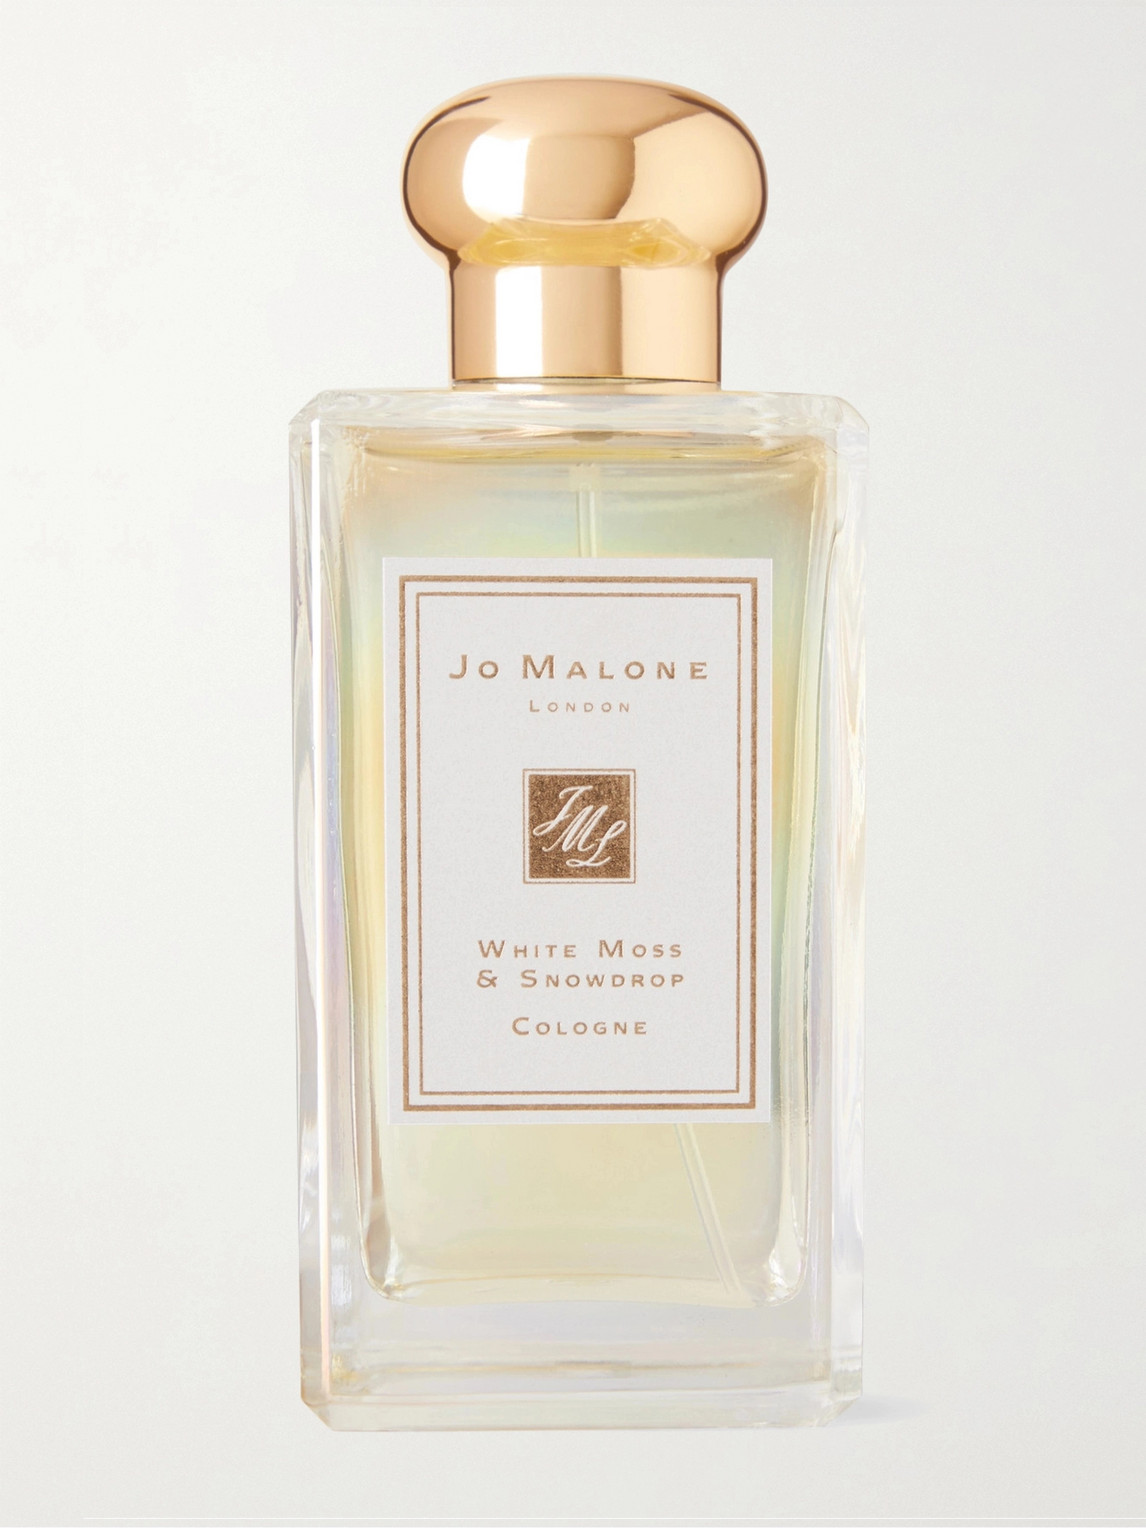 Jo Malone London White Moss & Snowdrop Cologne, 100ml In Colorless